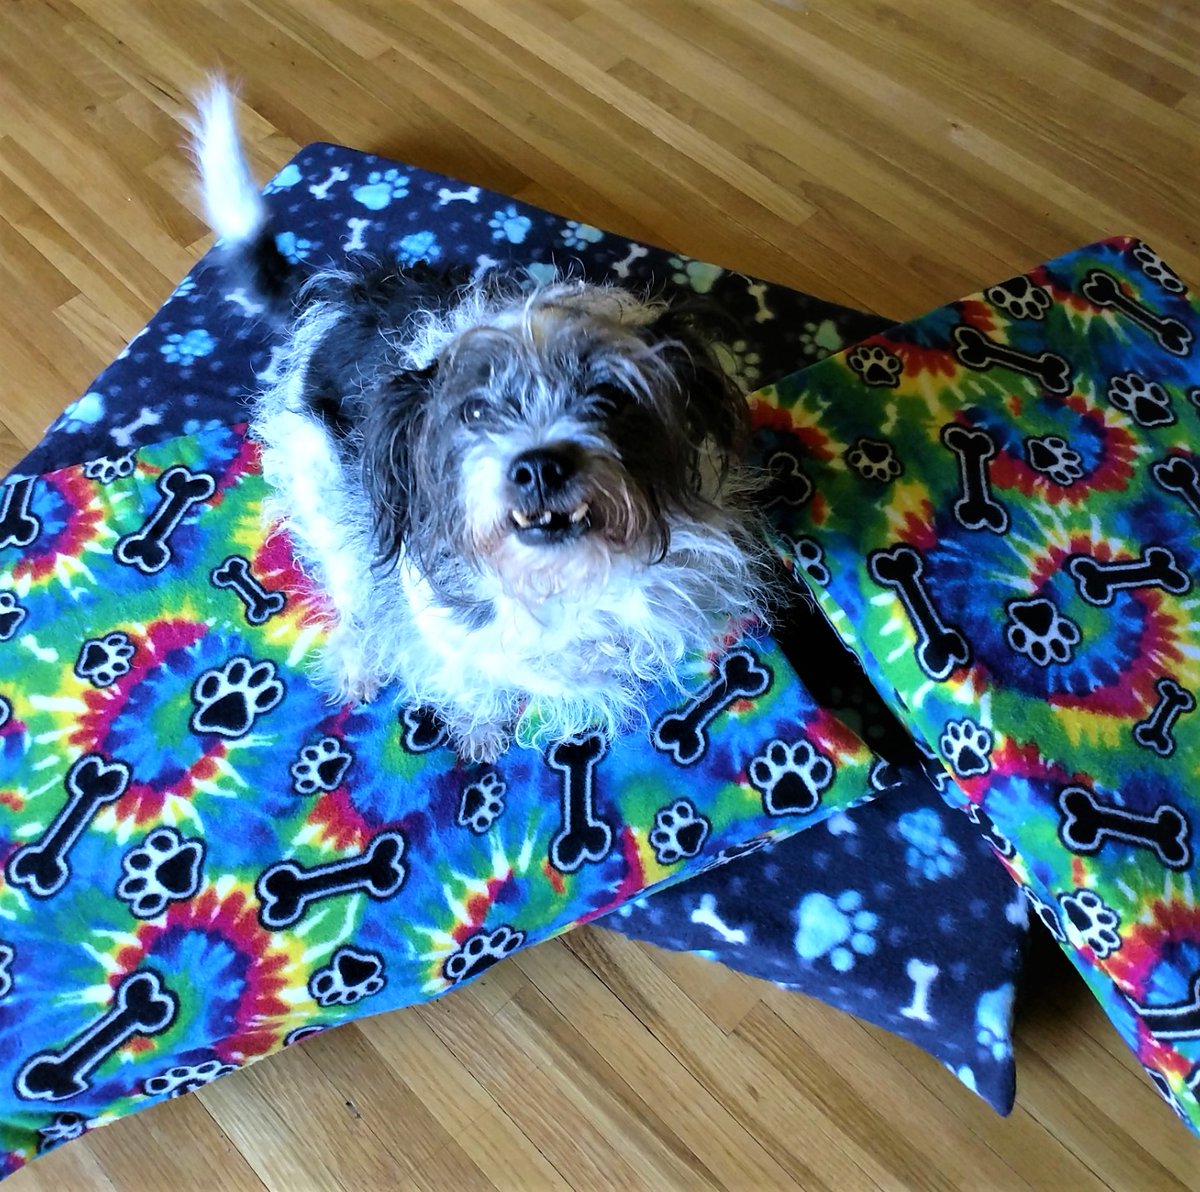 Ruby wants to show you some of the super-cool handmade beds that are prizes in the Mutt Strutt this year! He couldn't decide which one he likes most, so he piled them on top of each other and settled right in for the photo shoot! facebook.com/events/5425541…